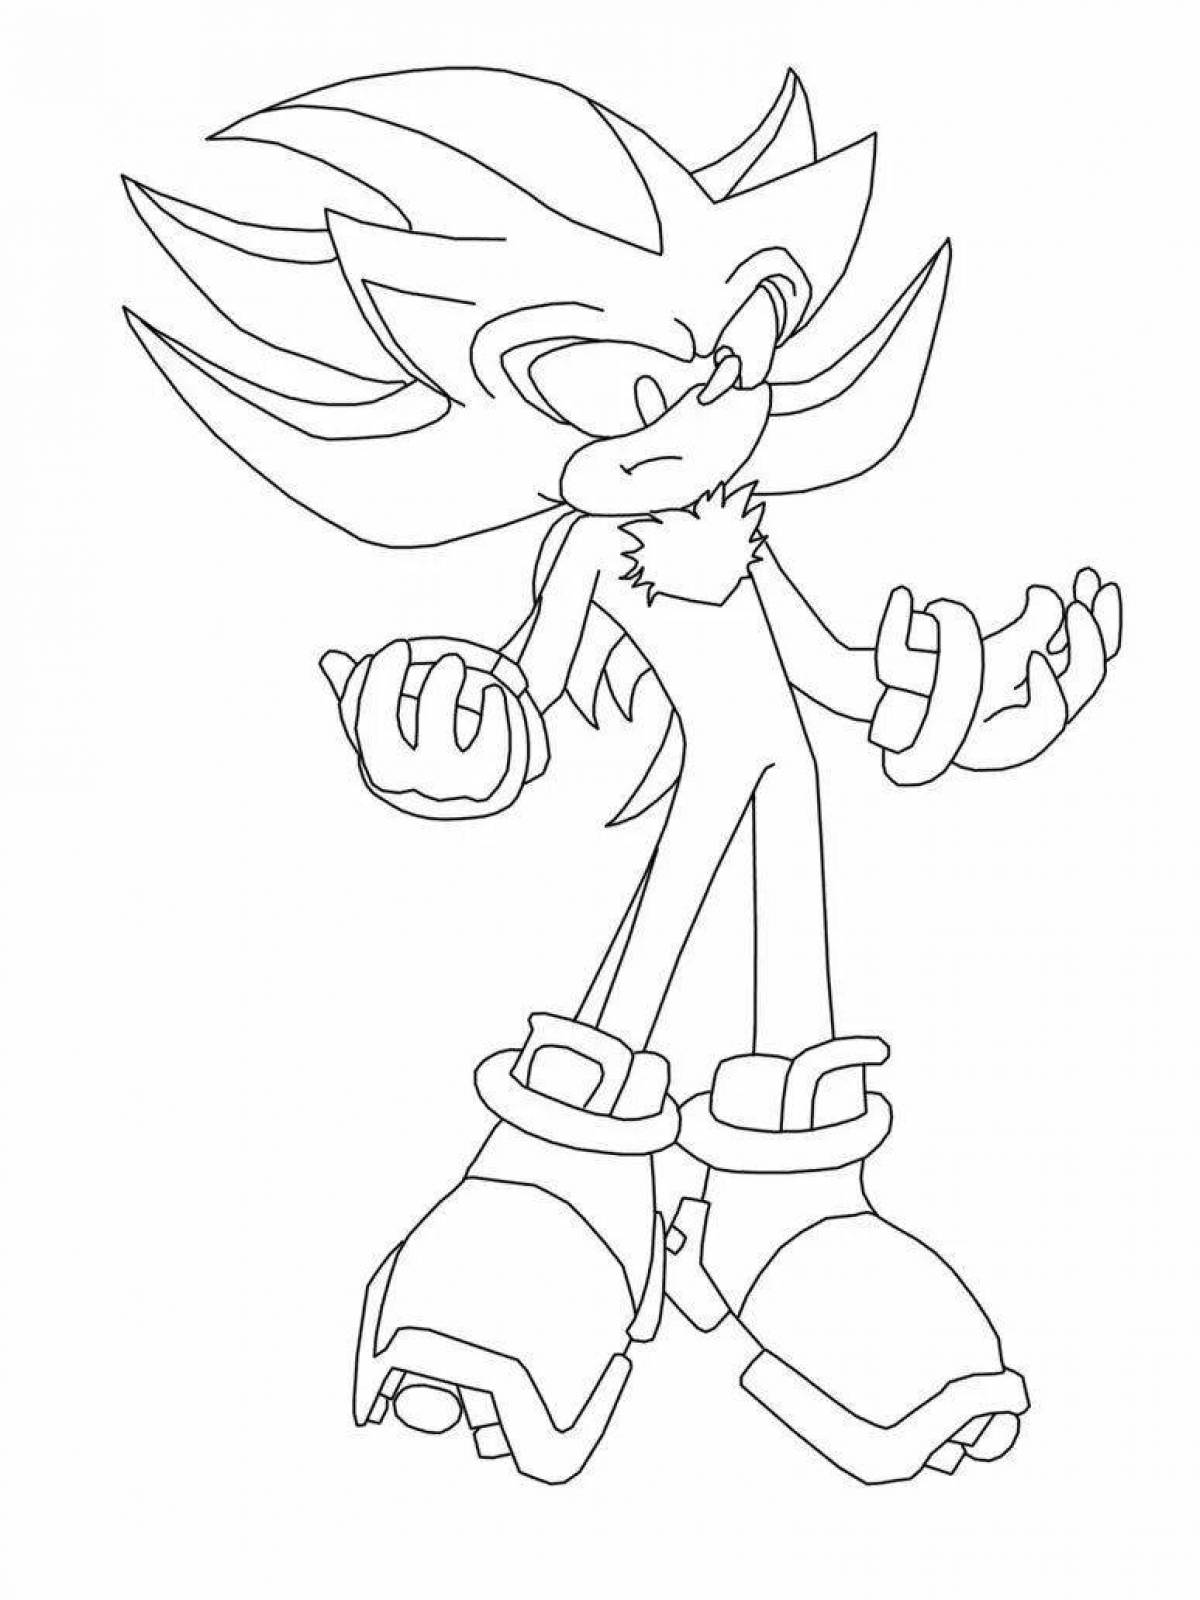 Shedel sonic bright coloring